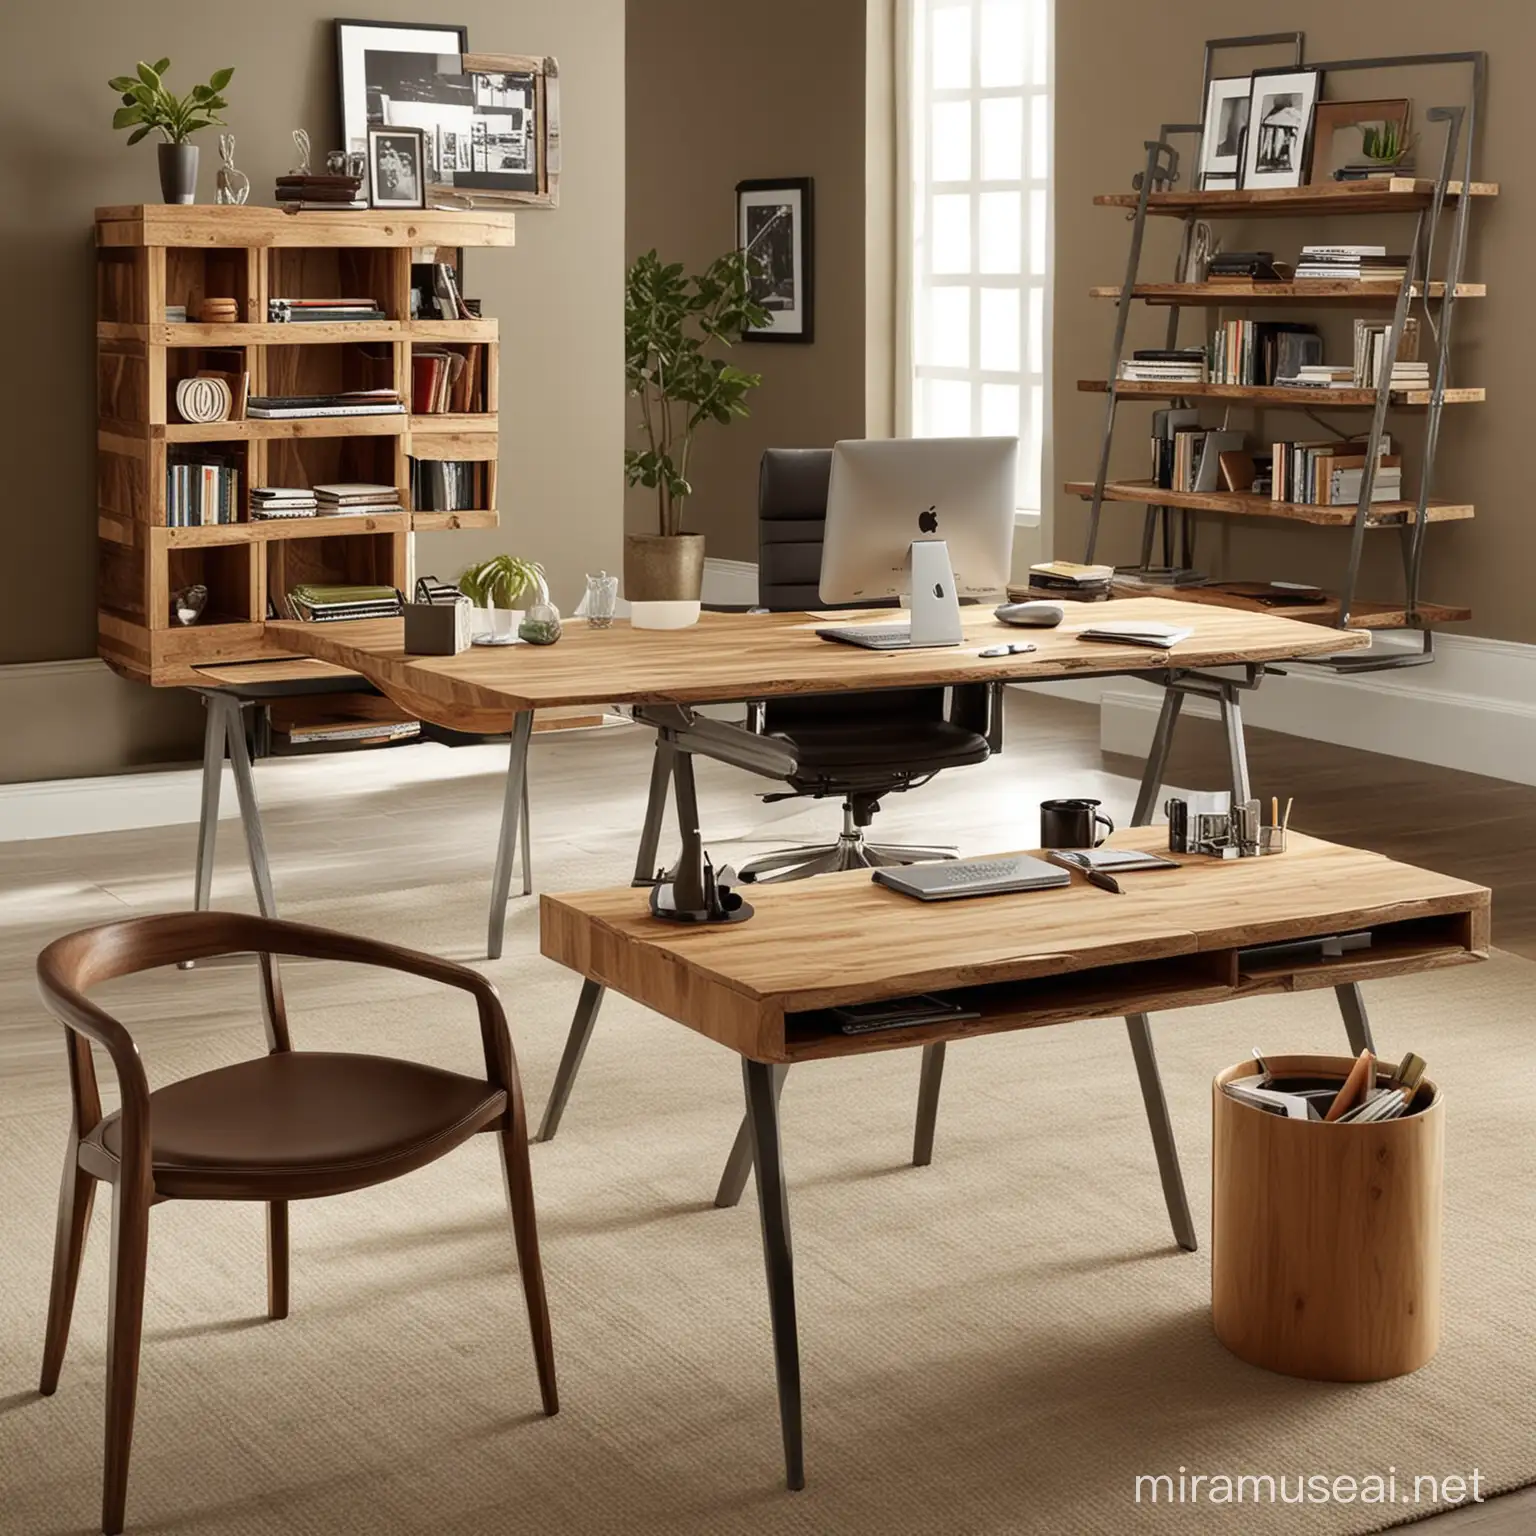 please create 5 different images of hip new sleek home offices done with sustainable, recycled and reused materials and objects.